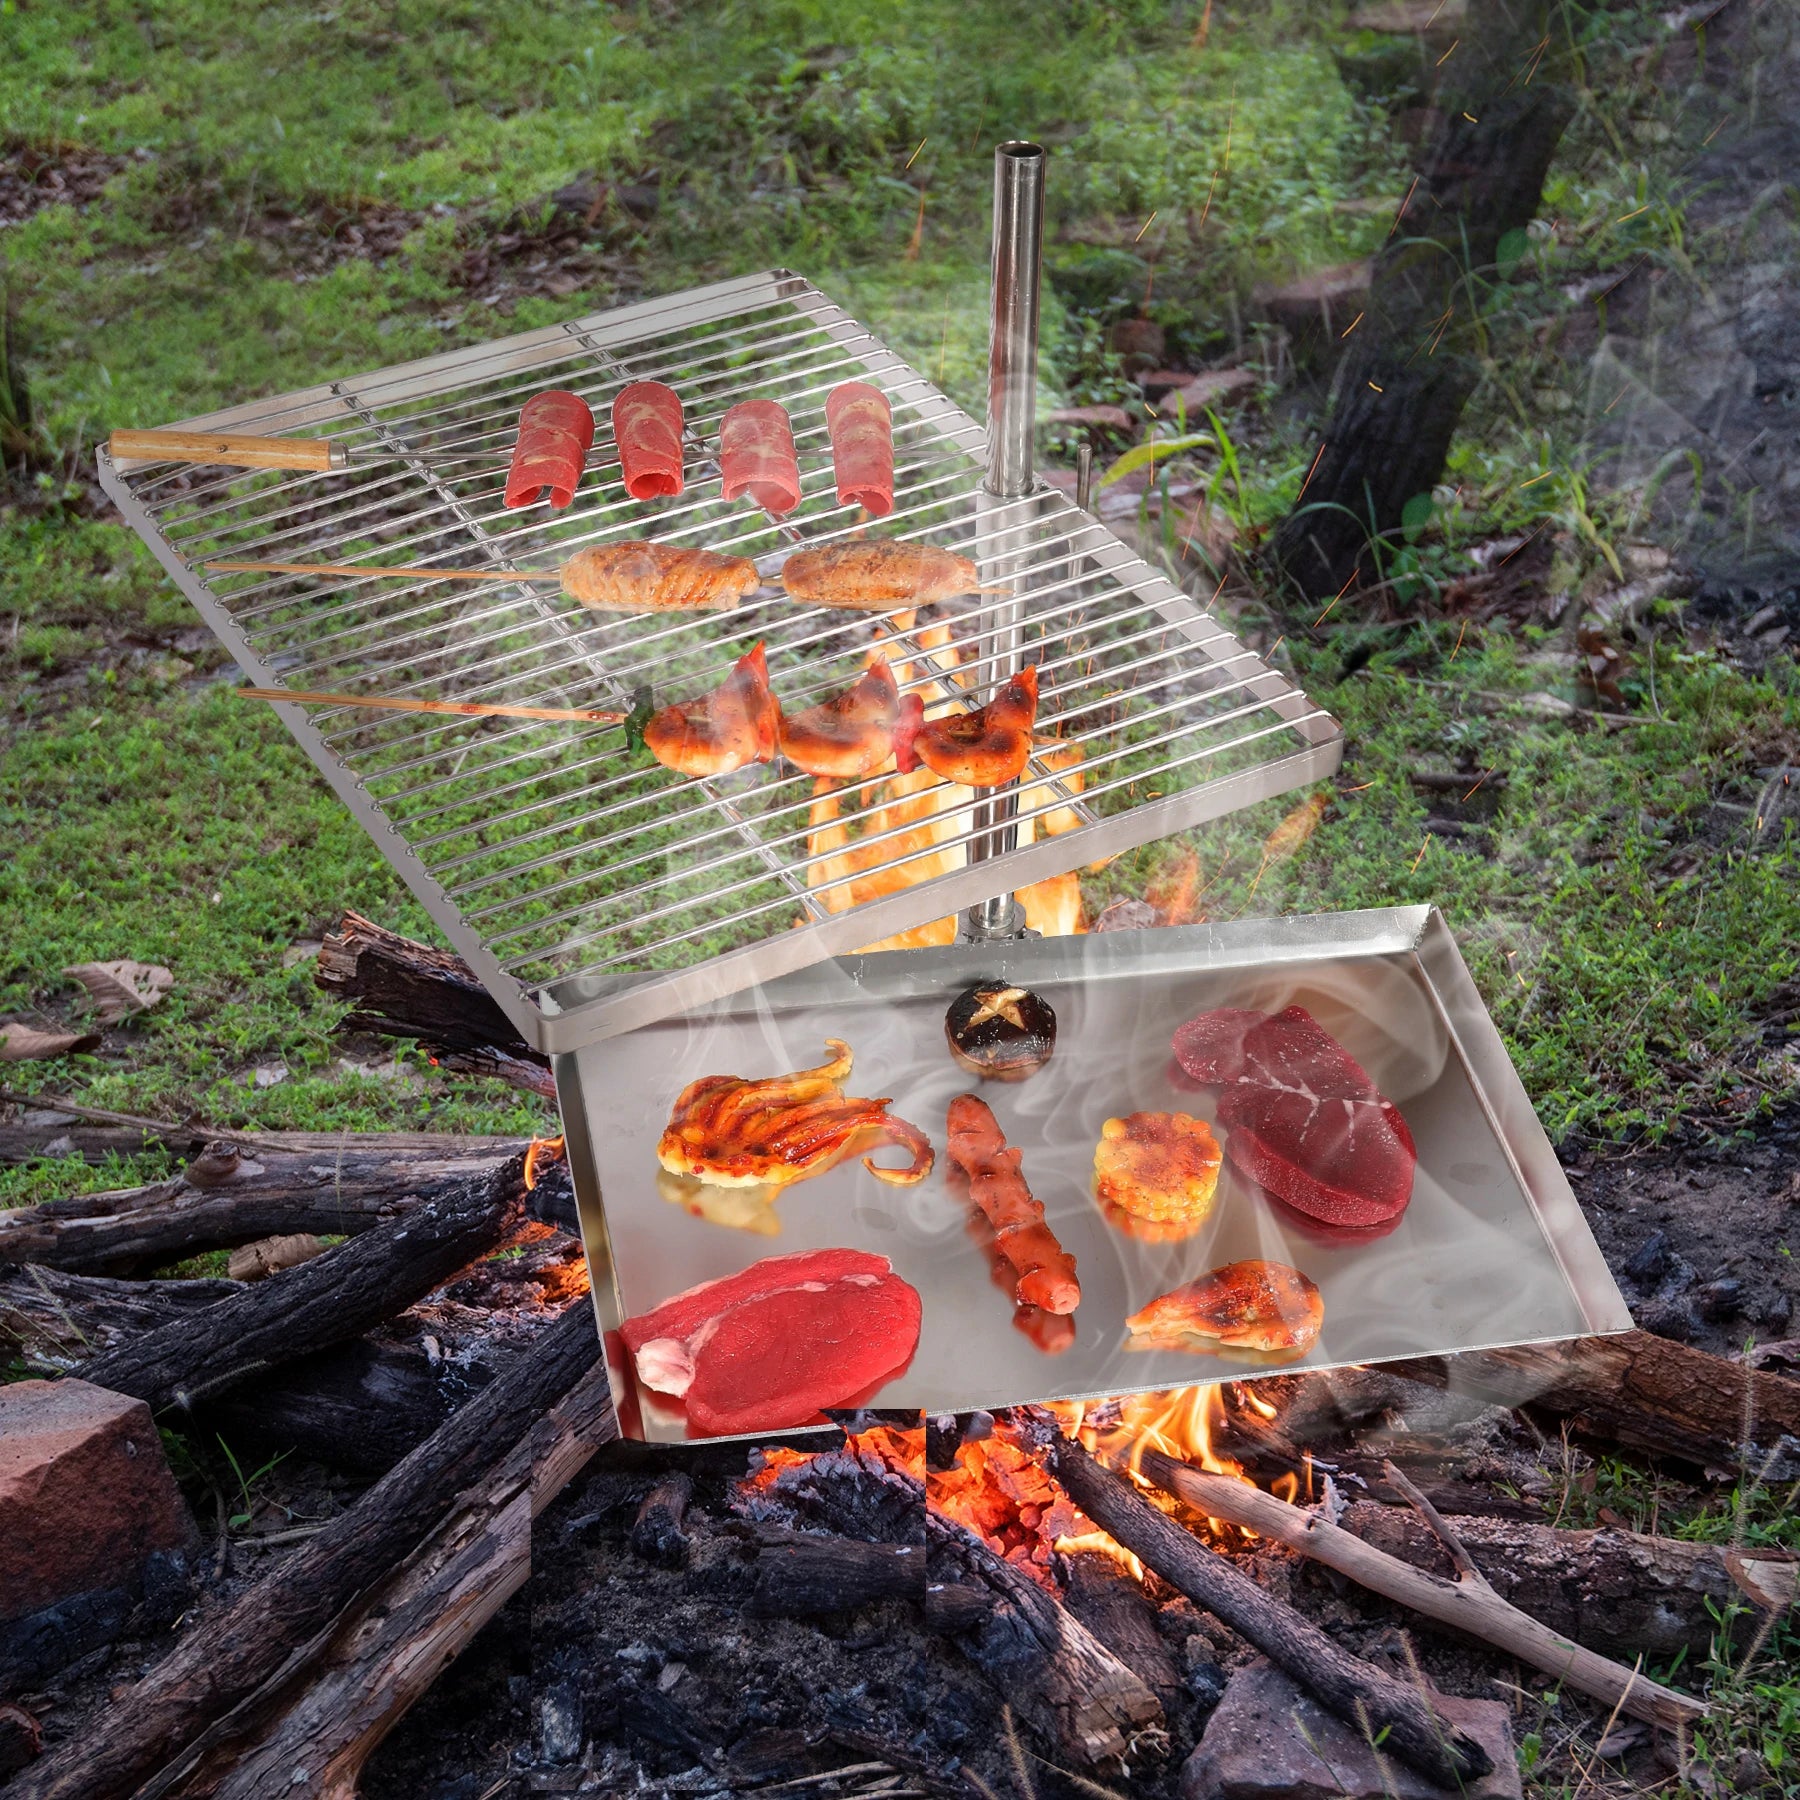 Swivel Camping Grill Grate Portable Campfire Cooking Outdoor Fire